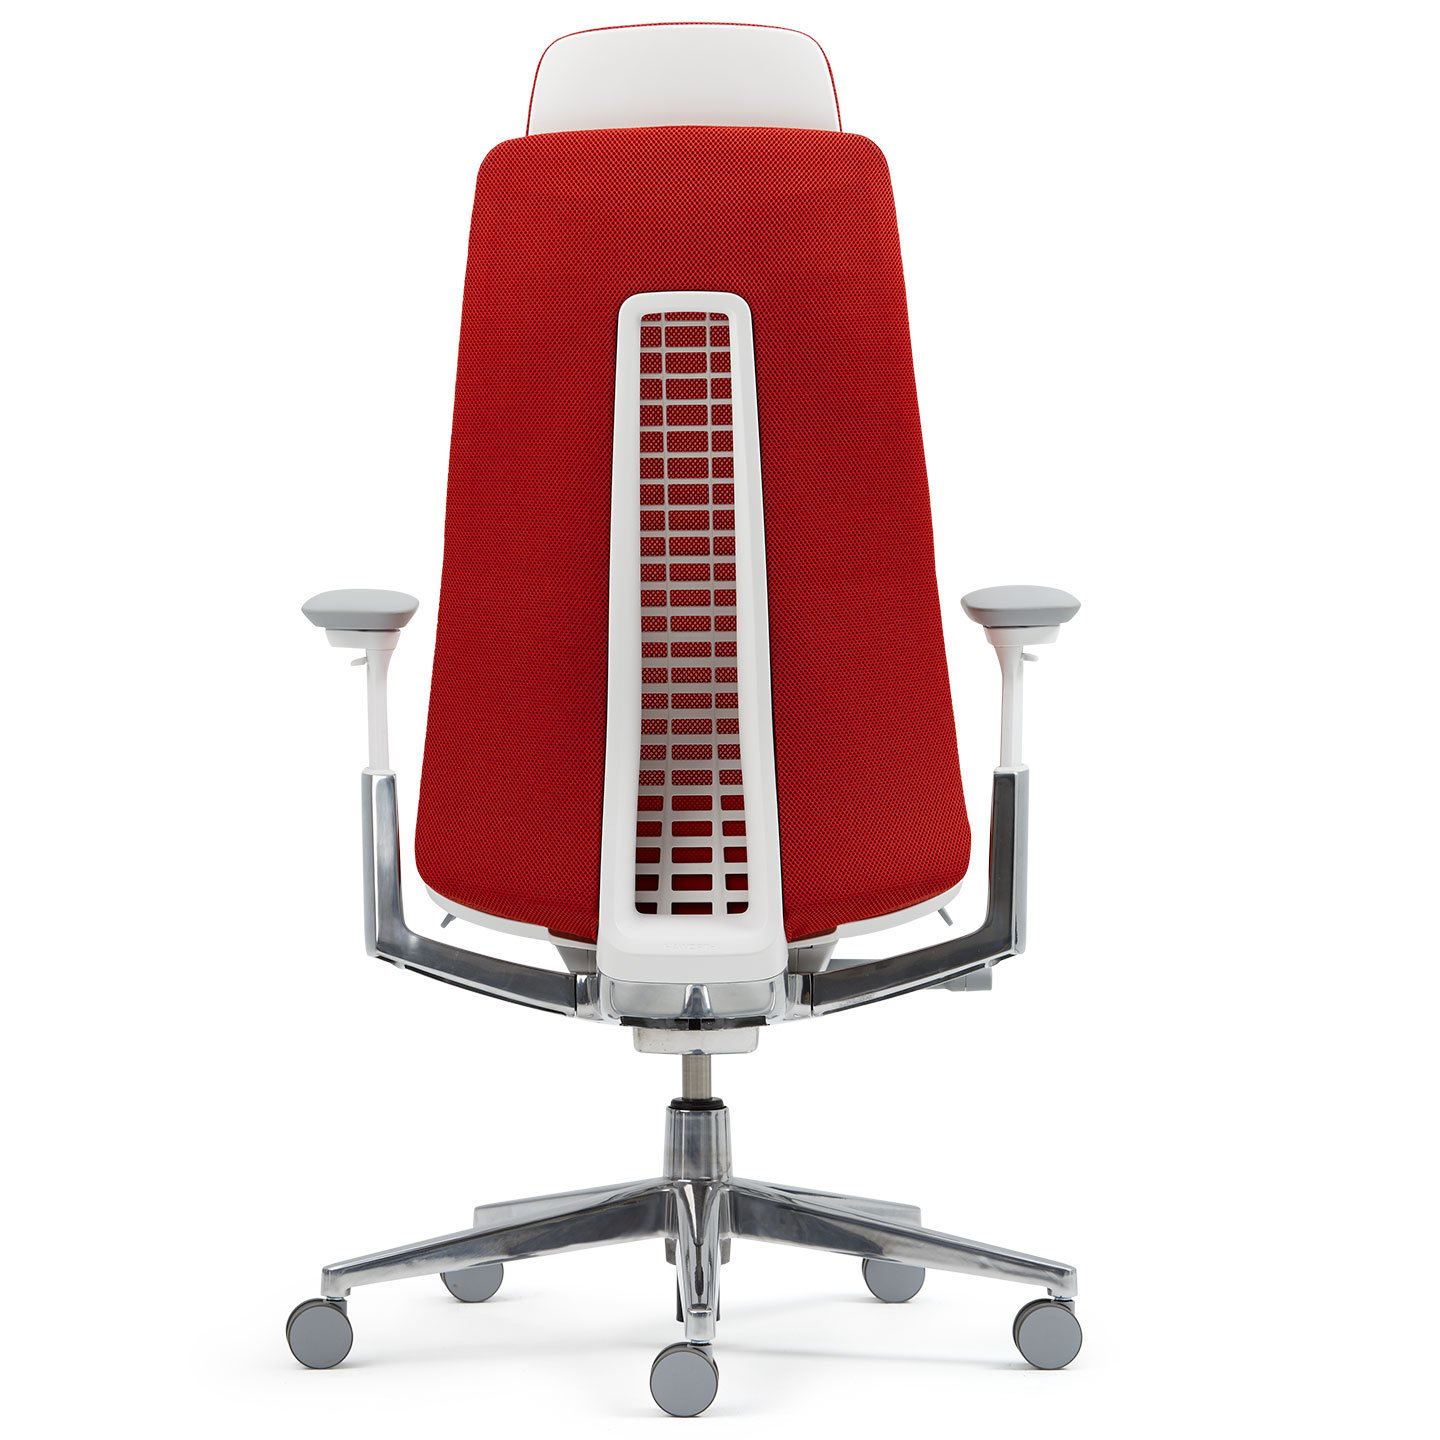 Haworth Fern Executive Task chair in red upholstery back view